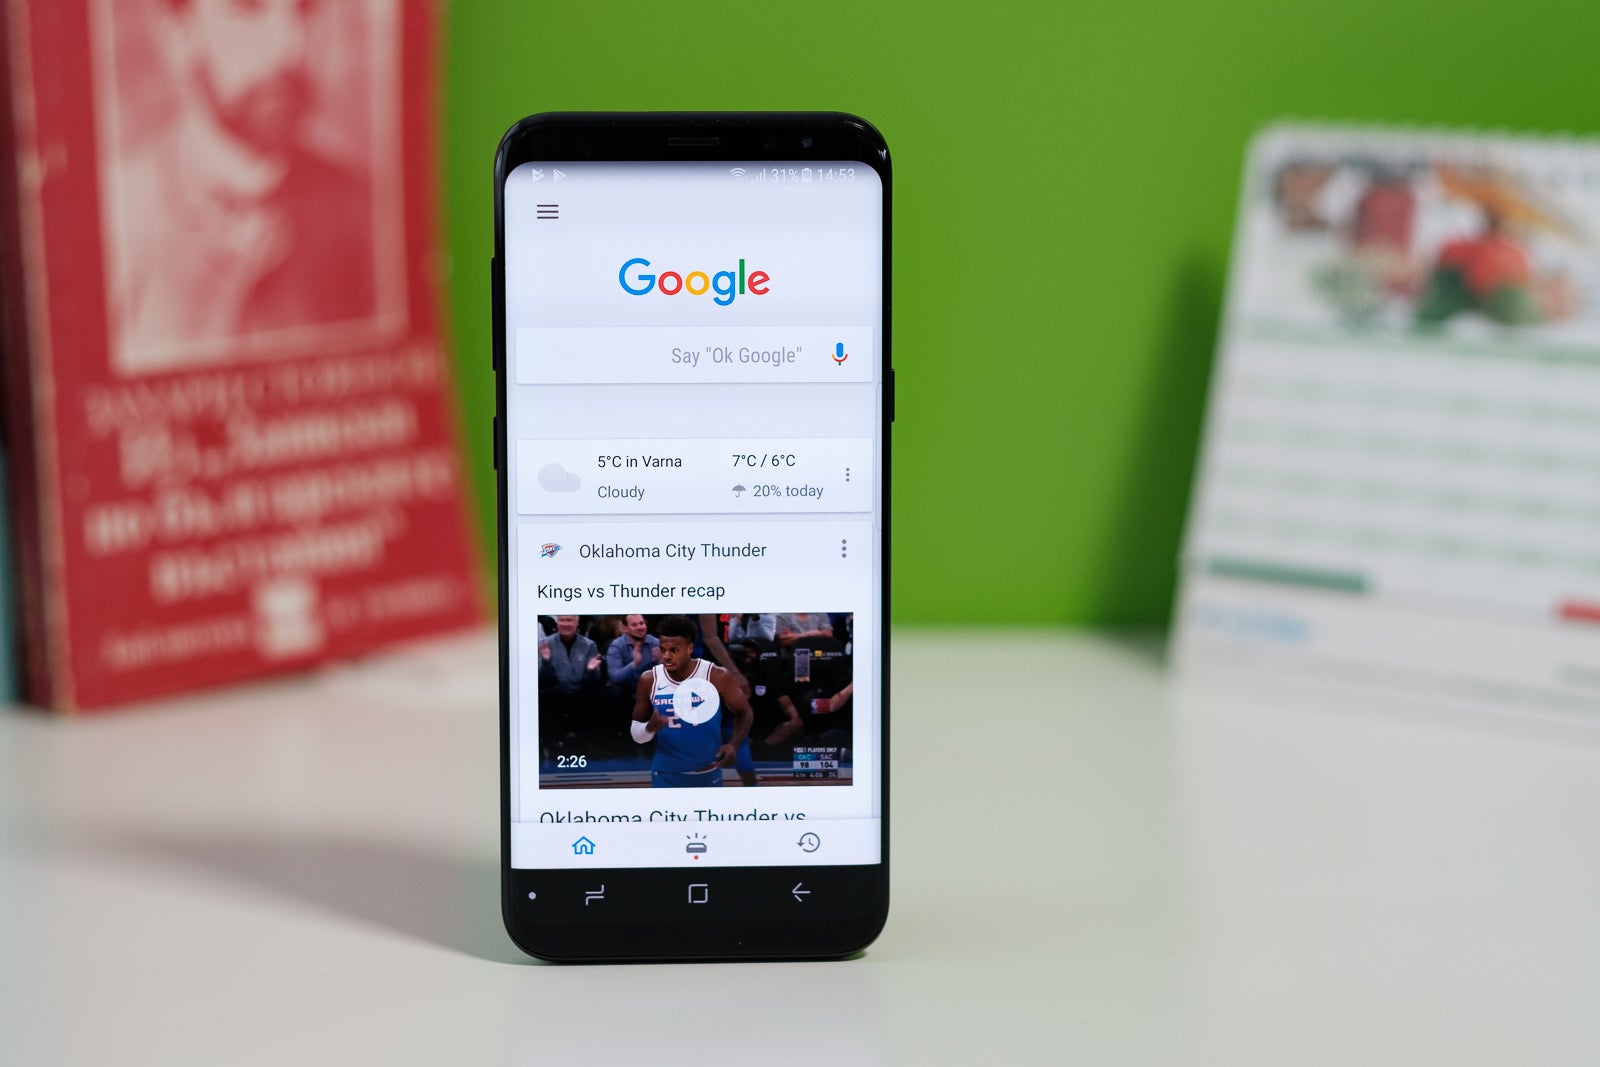 Google Search could become the default search engine of only one mobile operating system - Google to pay Apple $15 billion so it remains the iPhone's default search engine